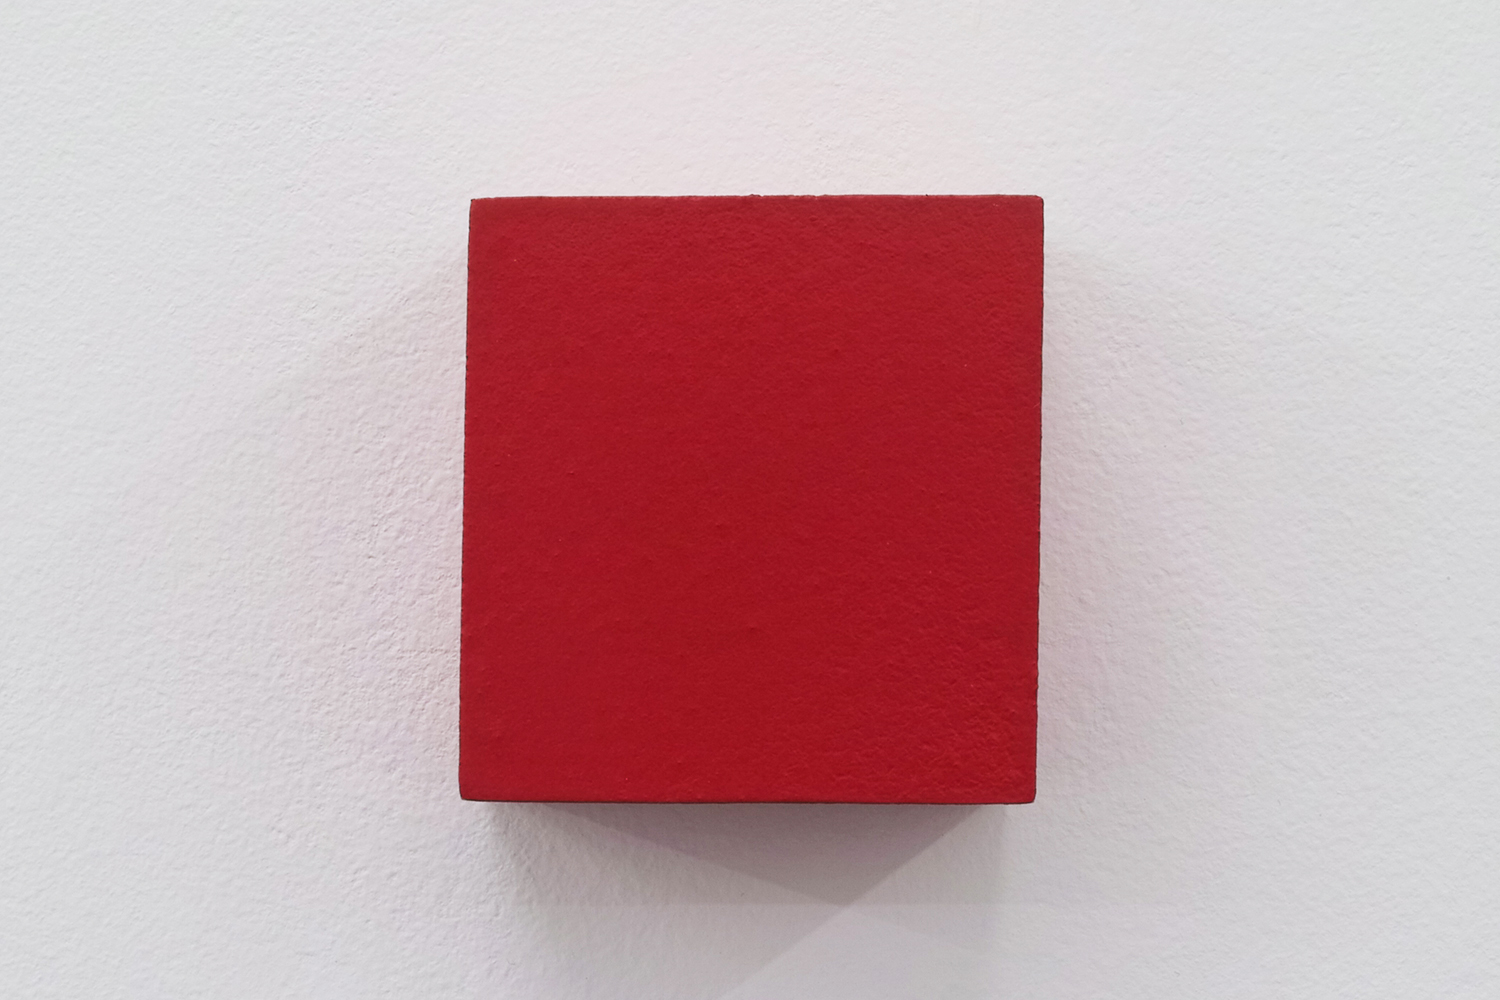 Text No. 544<br>pigment, acrylic on wood,  52 x 50 x 37 mm,  2005